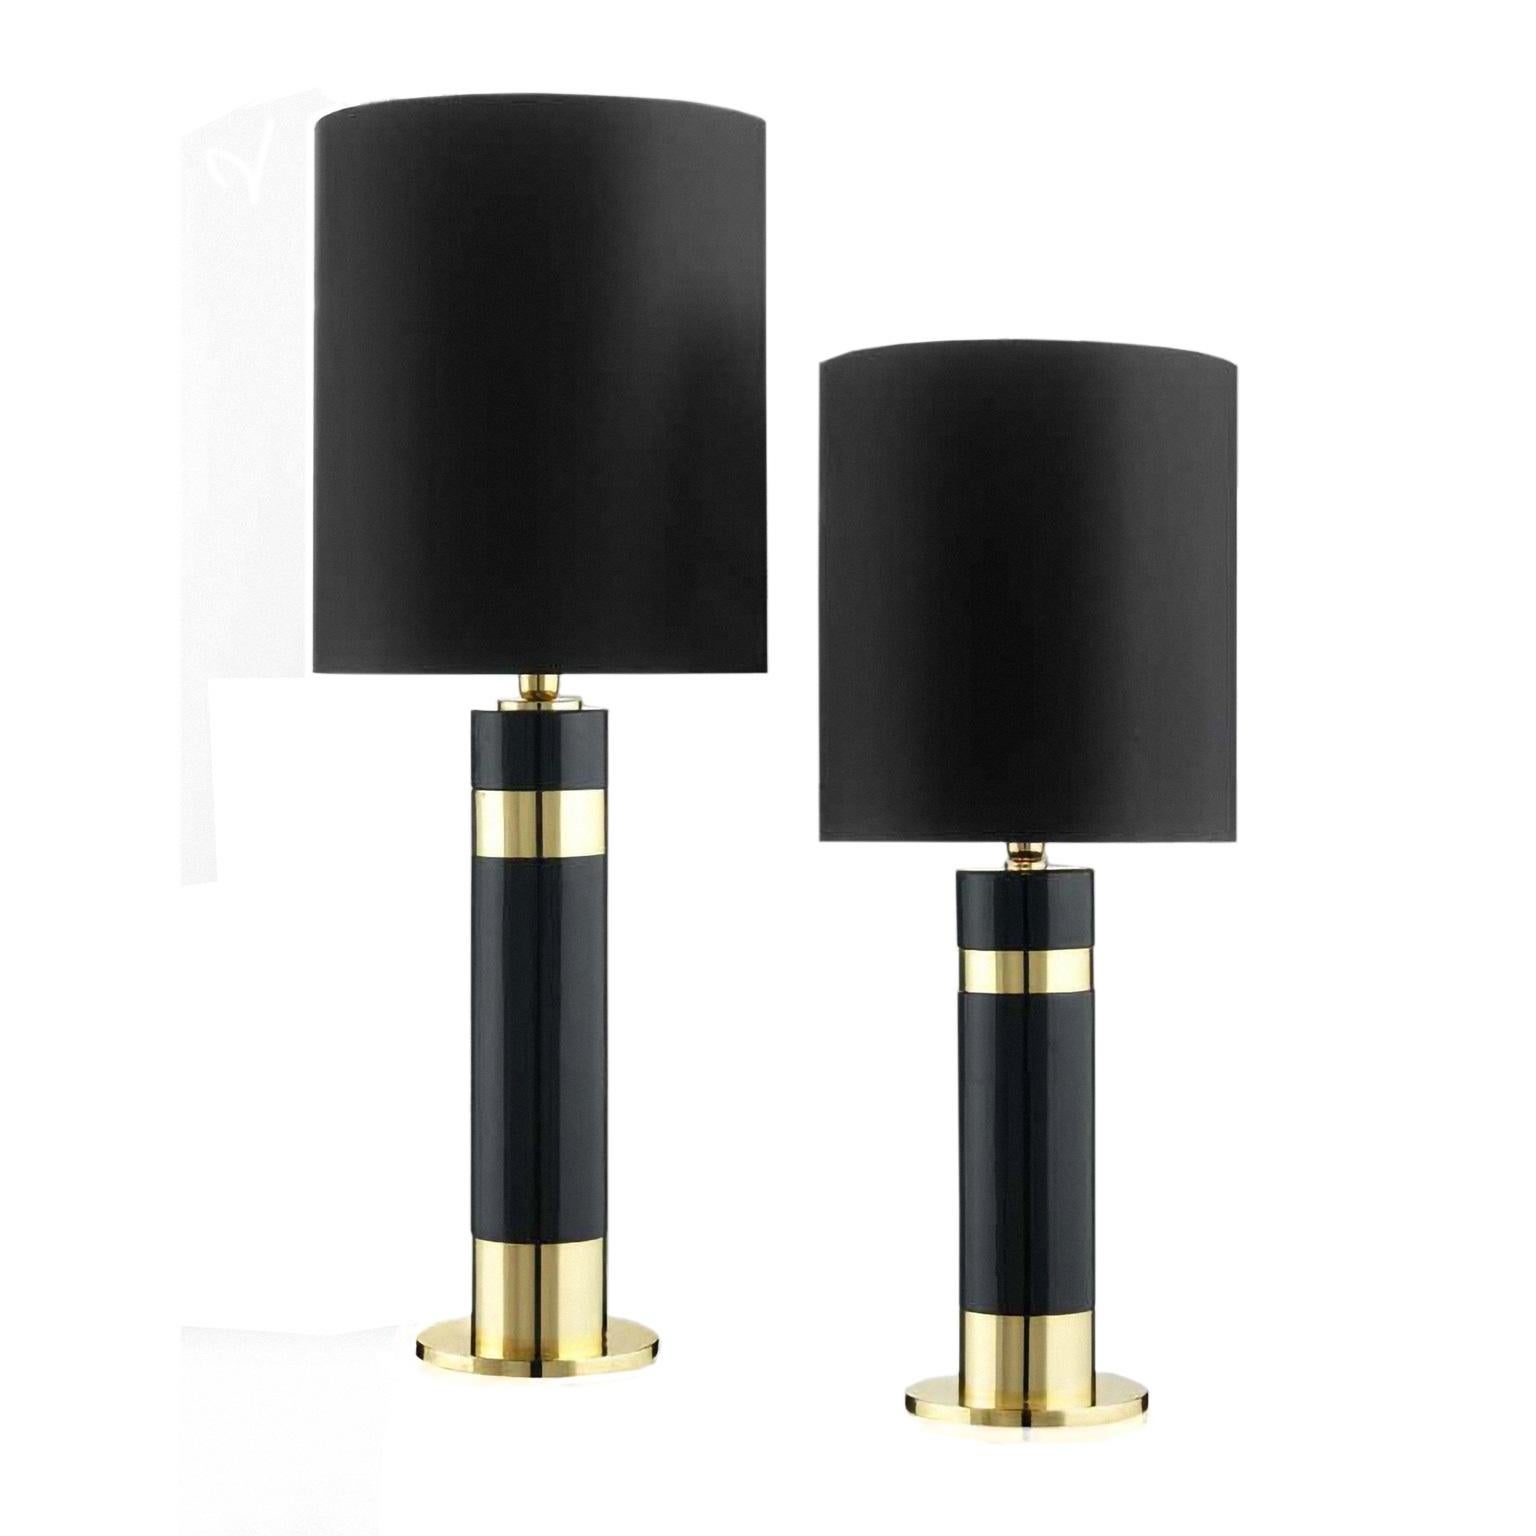 HERMES 2, Ceramic Lamp Black Glazed and Handcrafted in 24-Karat Gold In New Condition For Sale In Treviso, IT